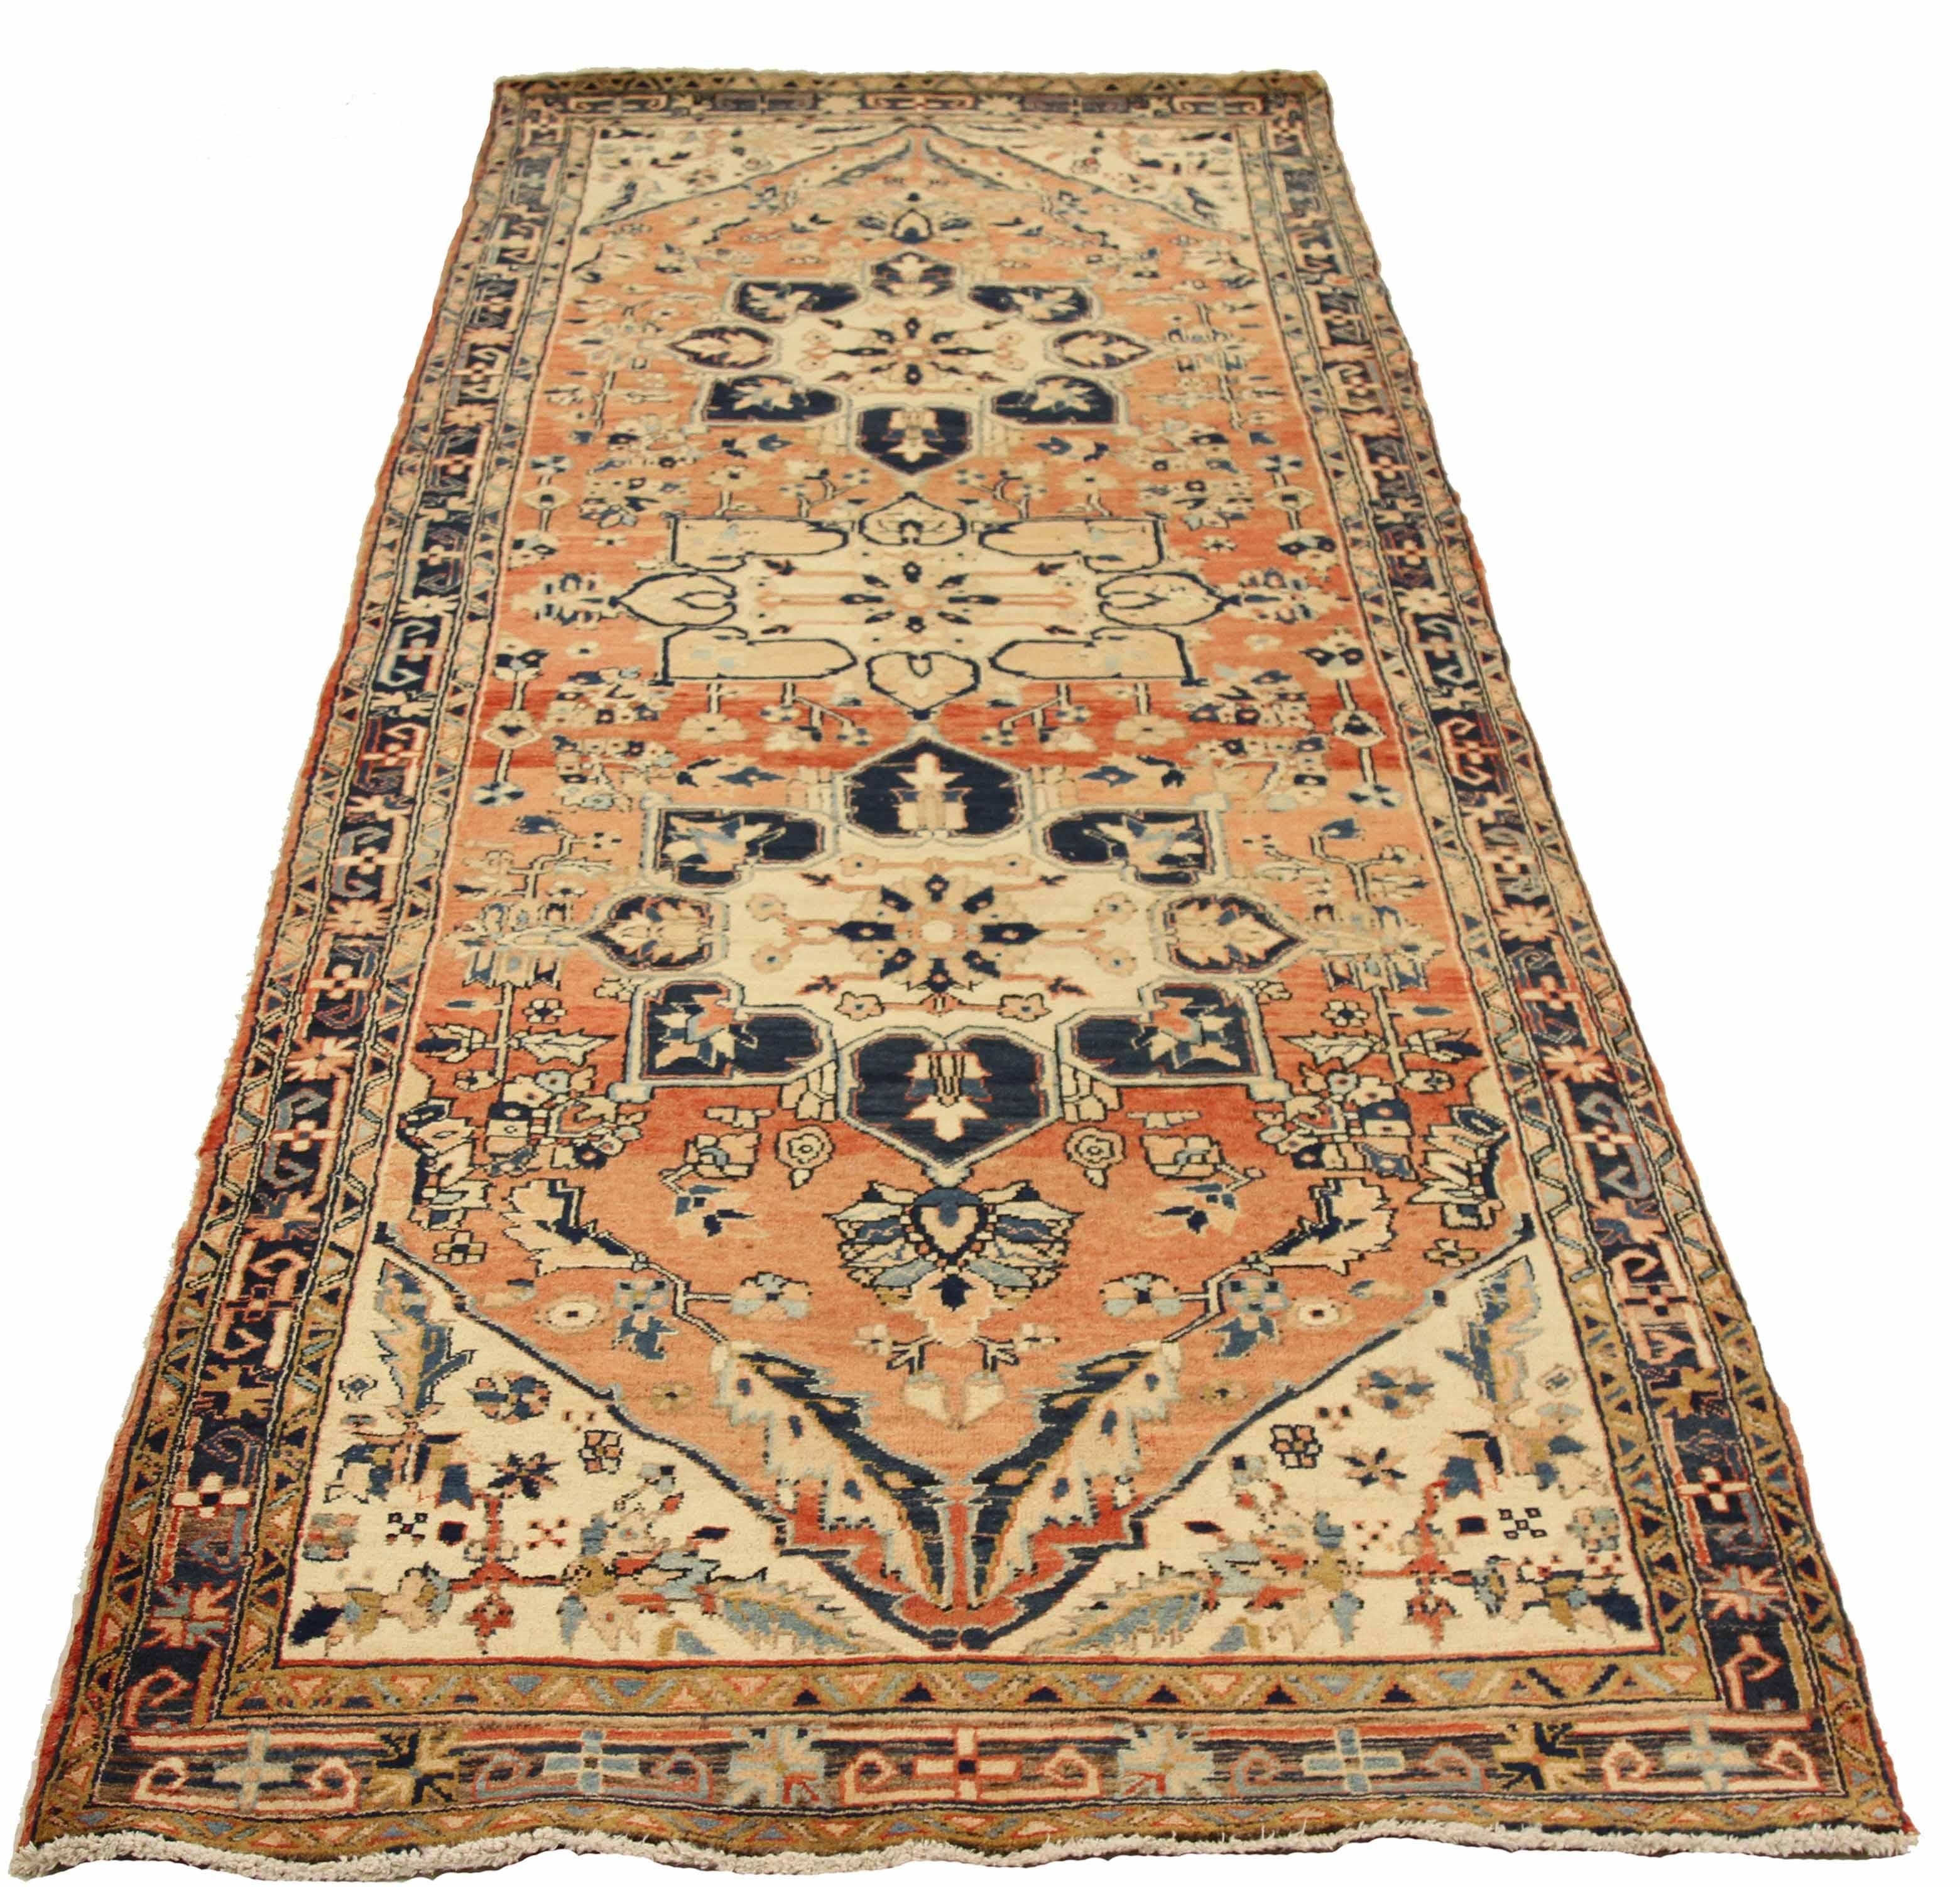 Antique Persian area rug handwoven from the finest sheep’s wool. It’s colored with all-natural vegetable dyes that are safe for humans and pets. It’s a traditional Heriz design handwoven by expert artisans.It’s a lovely area rug that can be